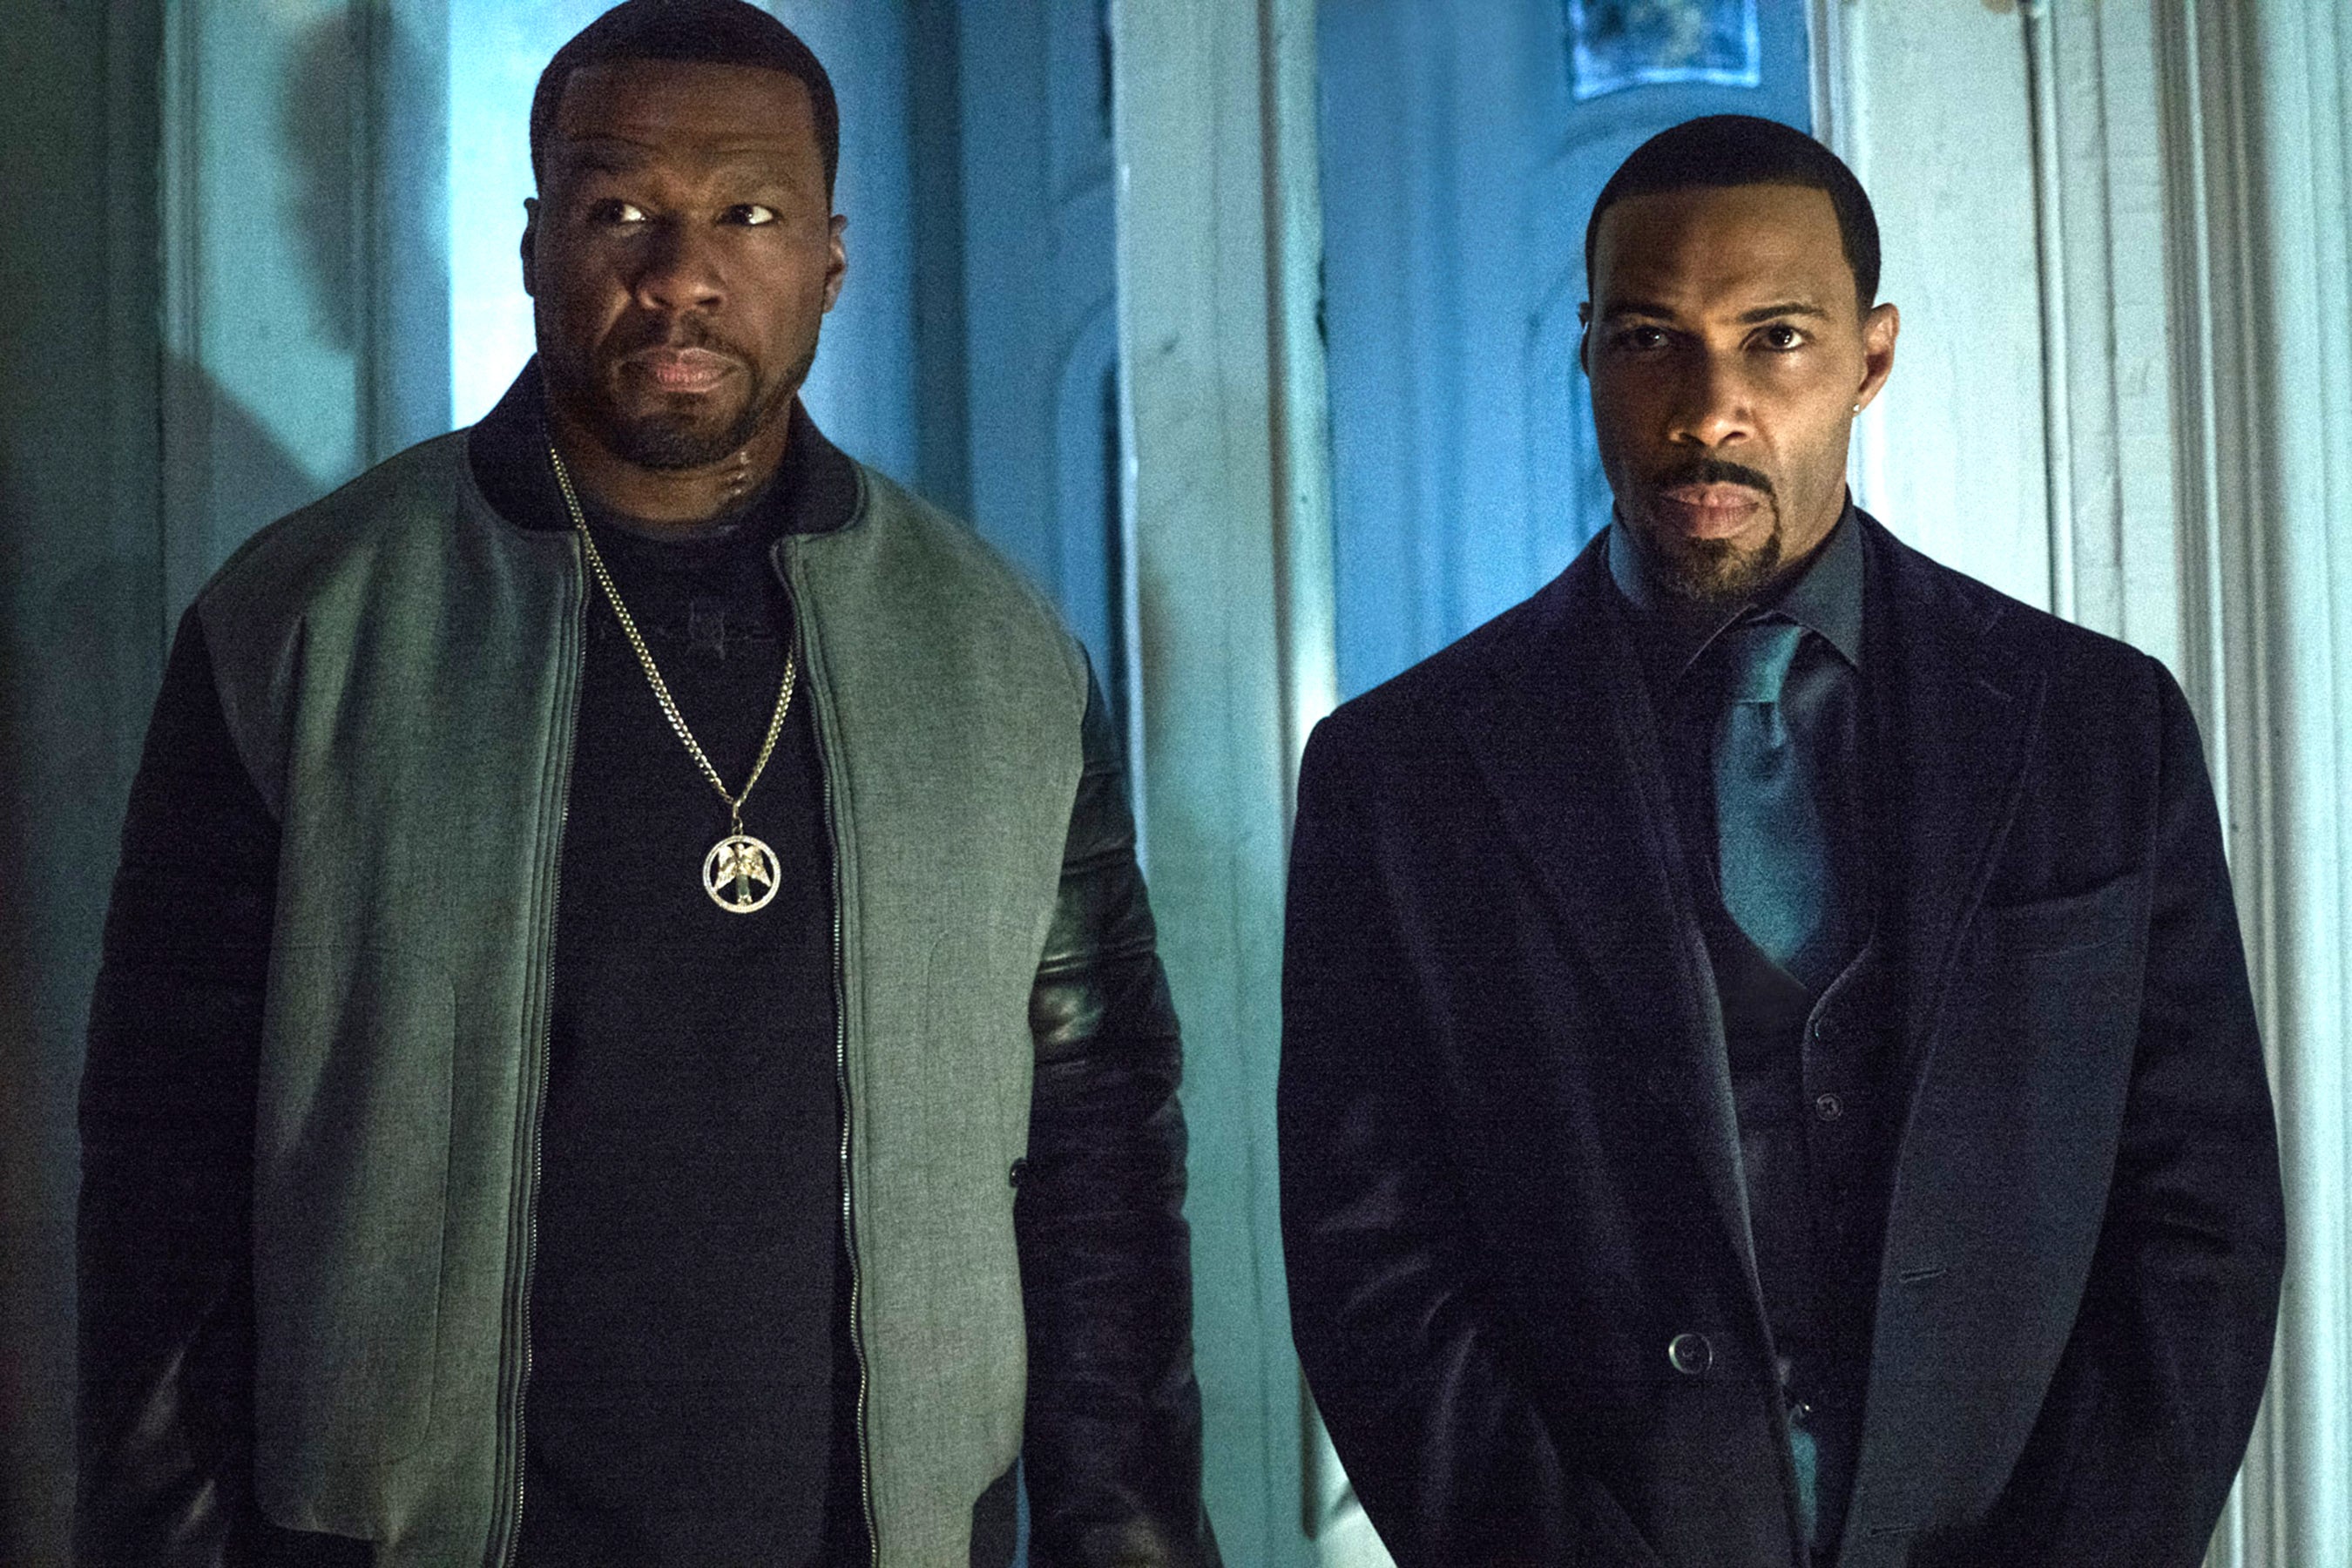 'Power' Creator Breaks Down That Big Death, Teases 'Unexpected' Ending To Season
